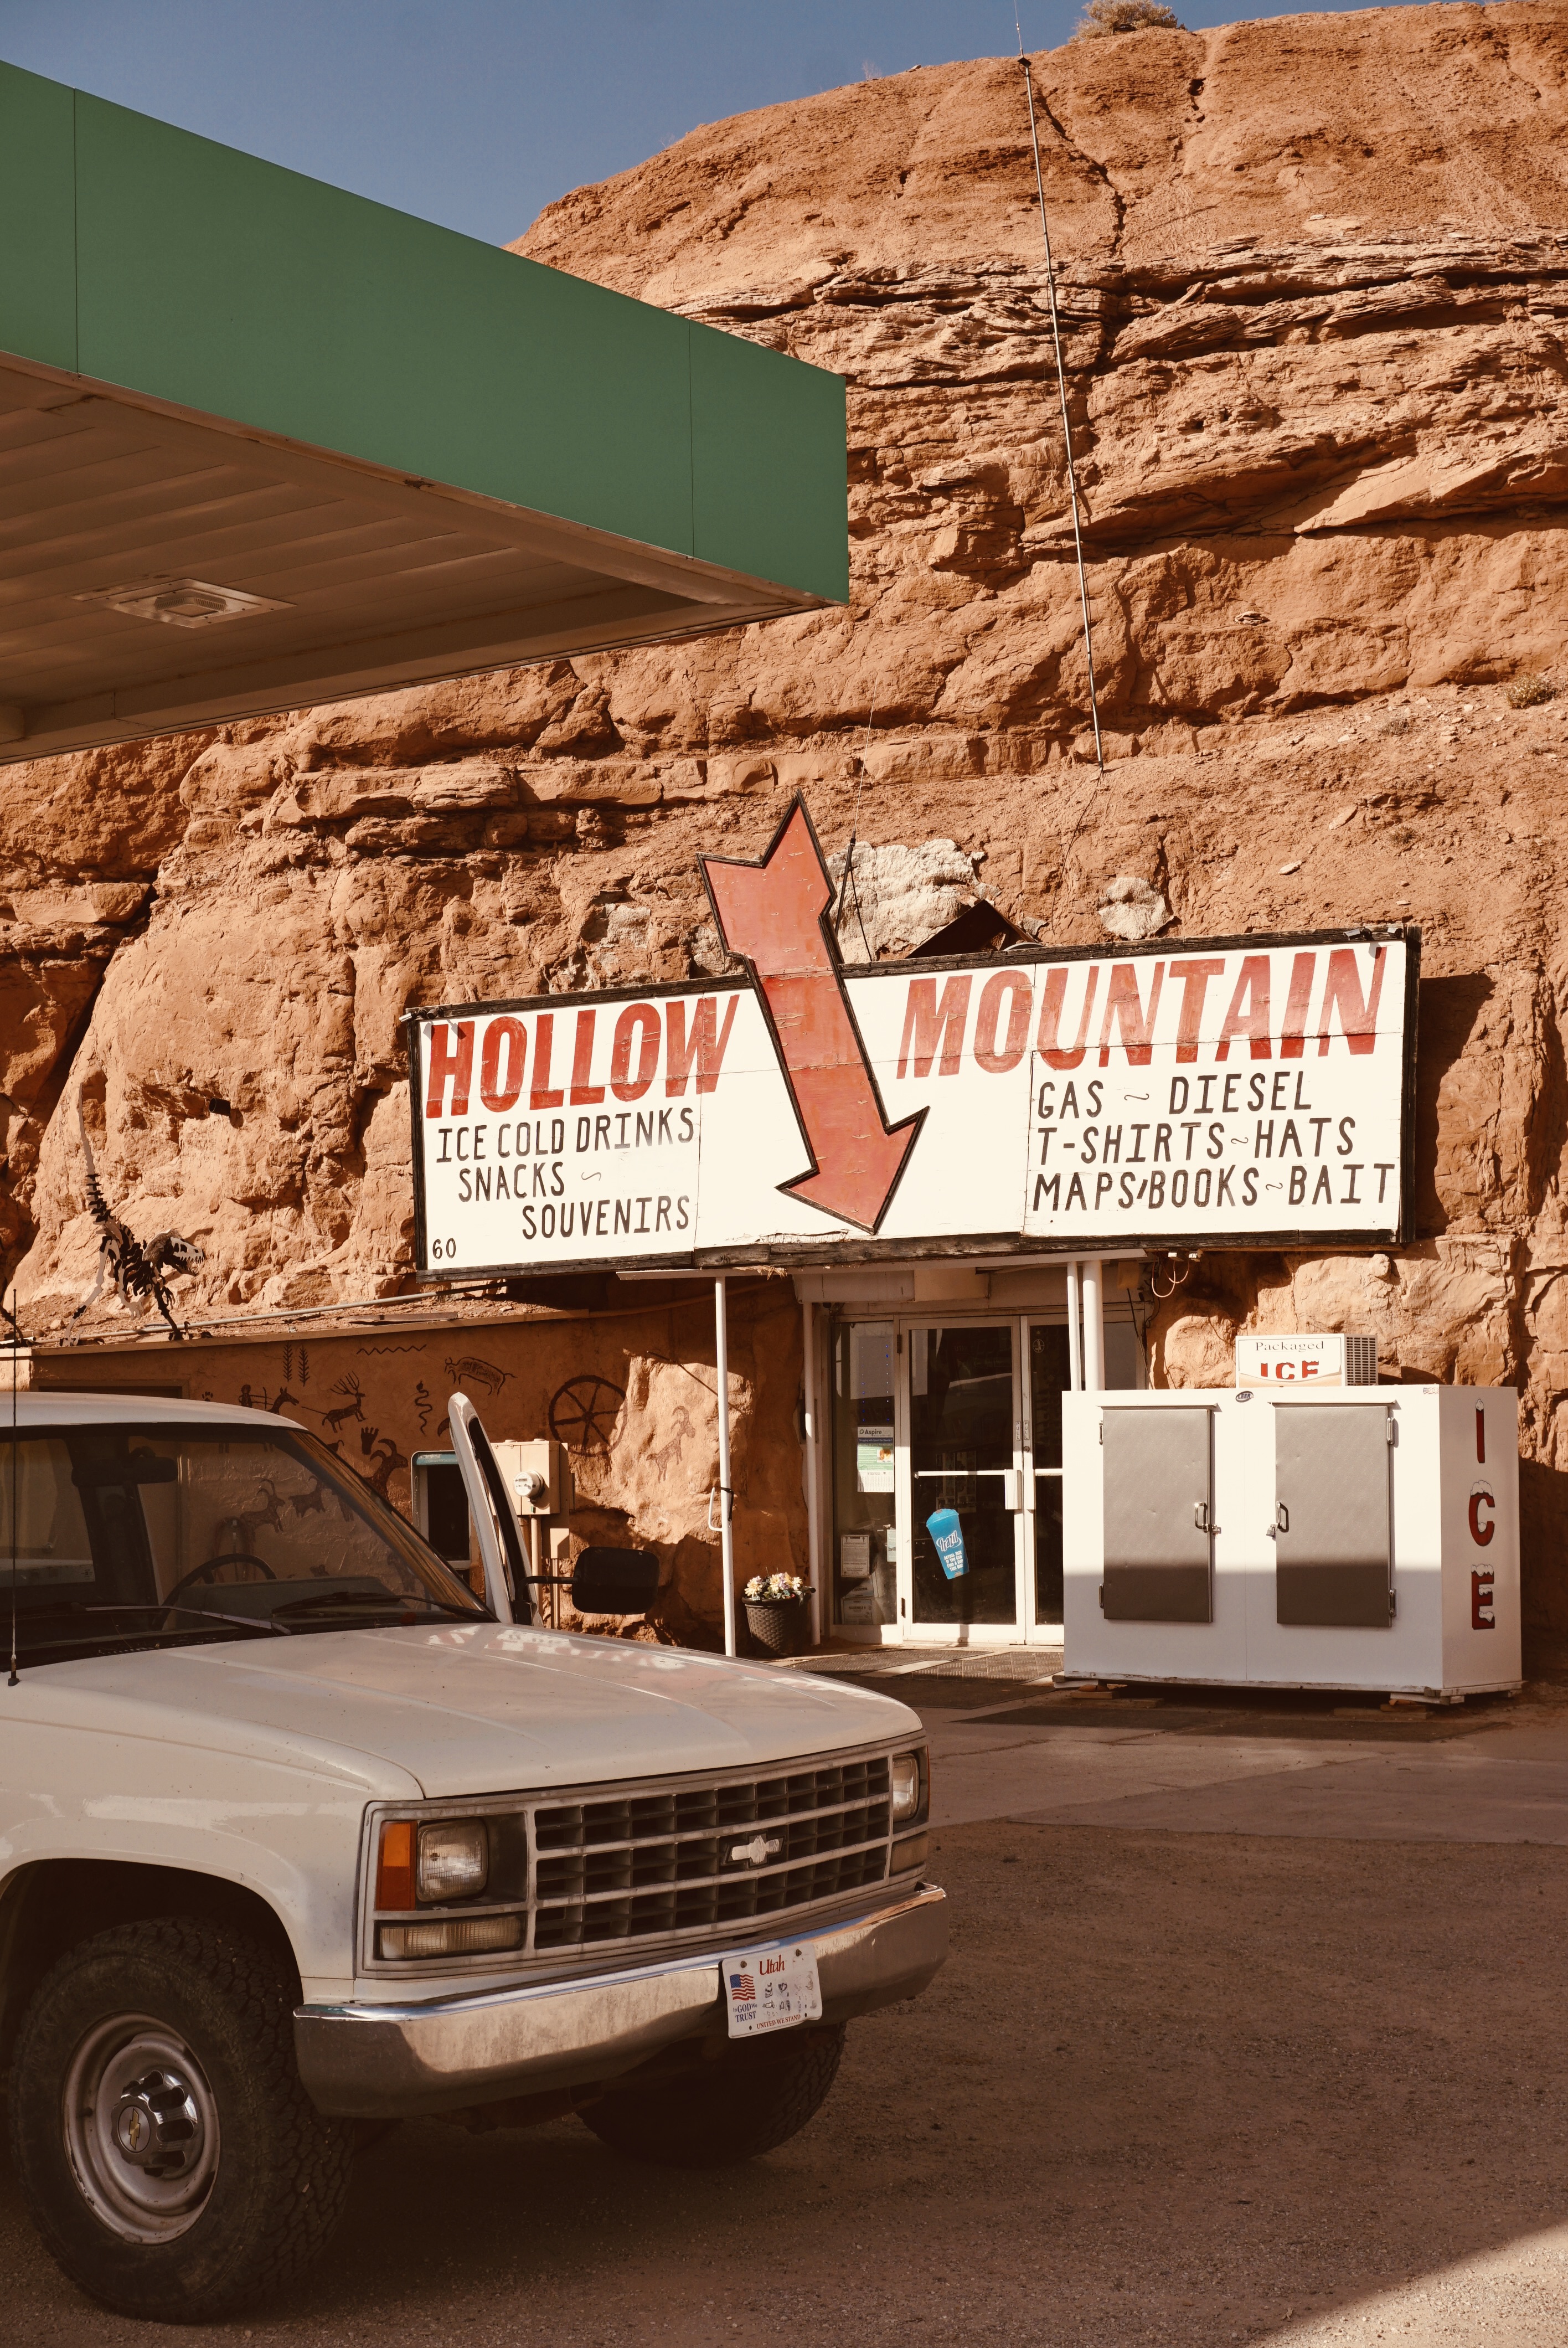 standing outside Hollow Mountain which is a popular attraction in Hanksville, Utah